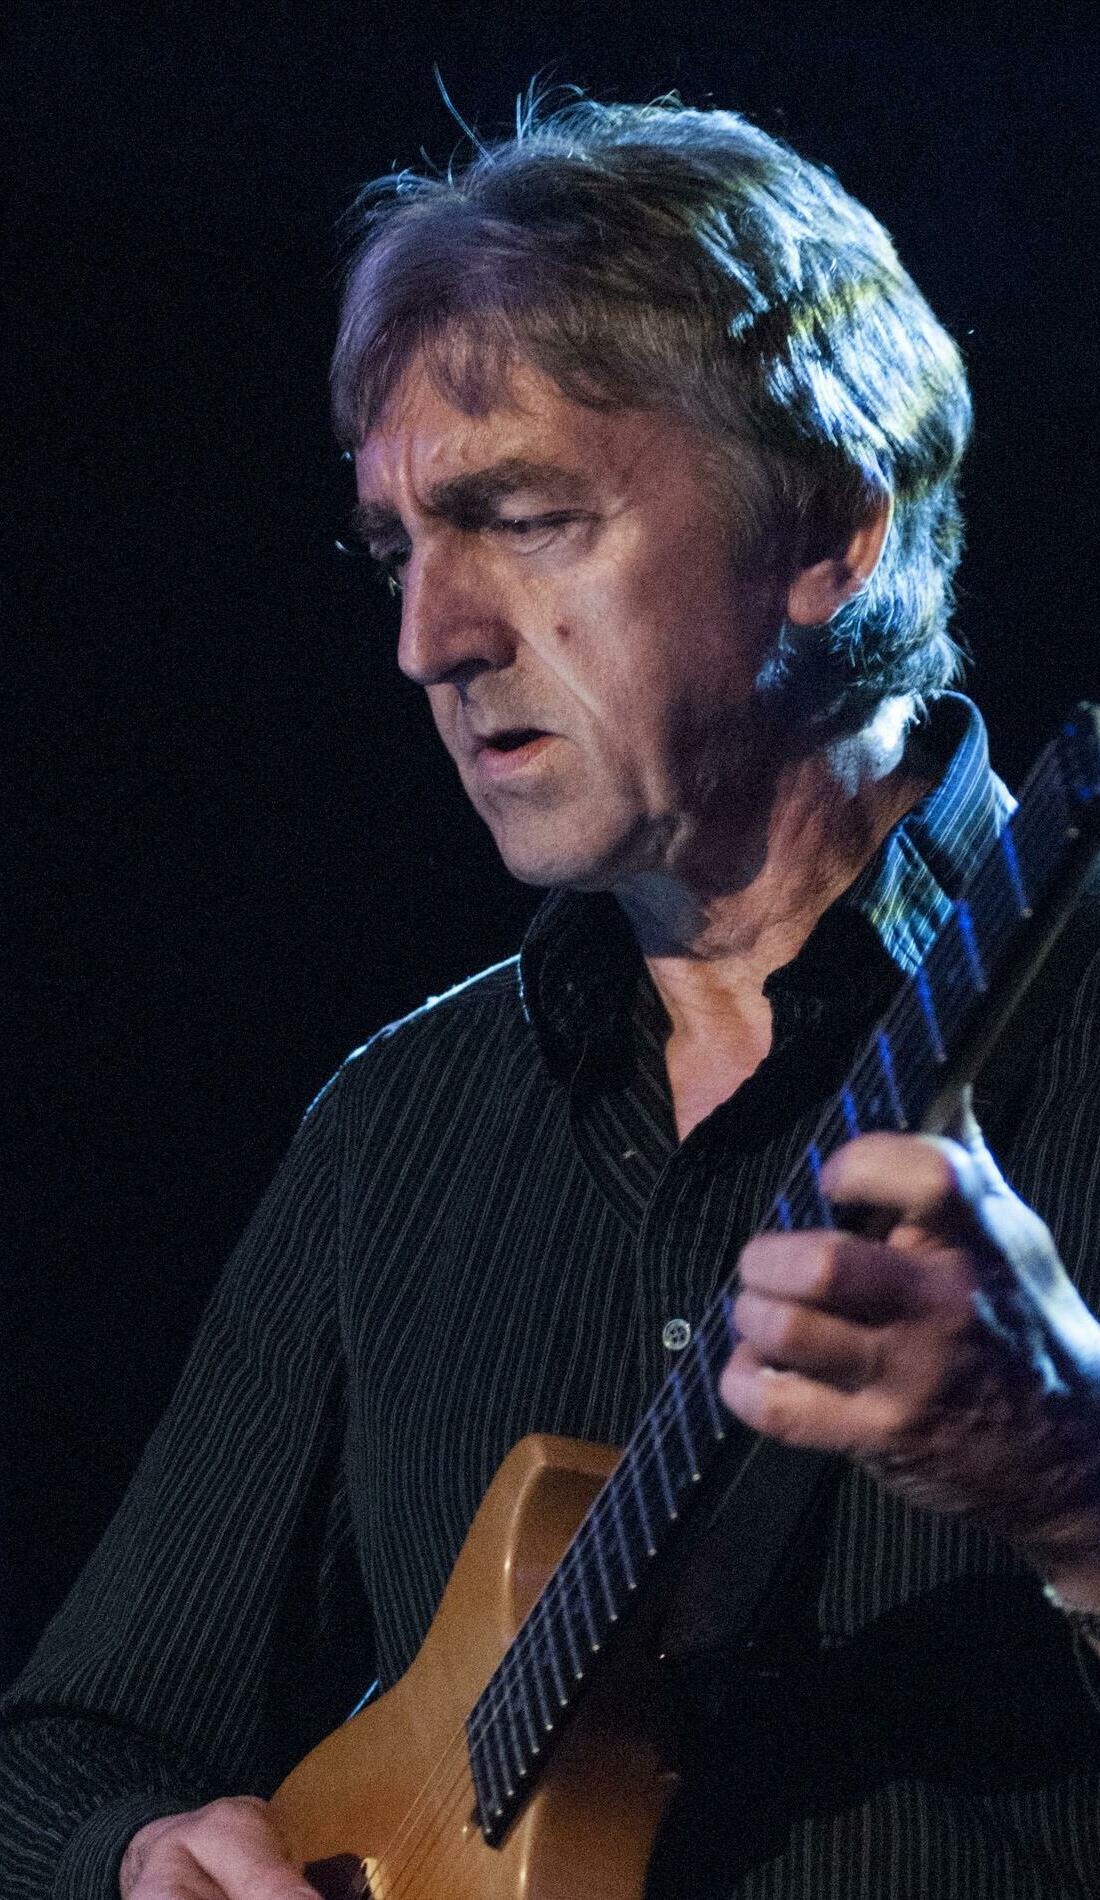 A ALLAN HOLDSWORTH live event